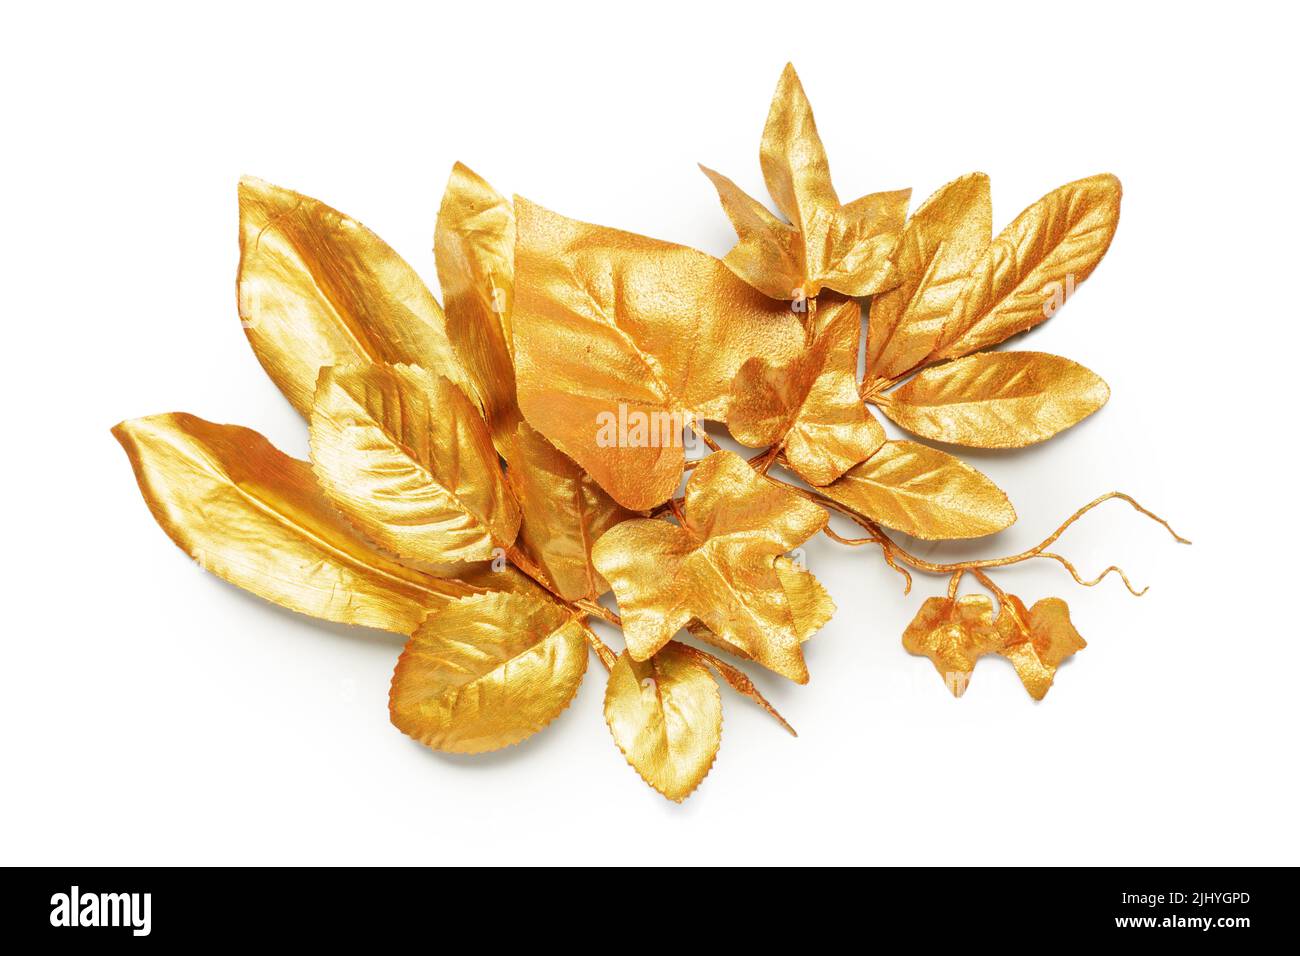 Gold leaves Cut Out Stock Images & Pictures - Alamy